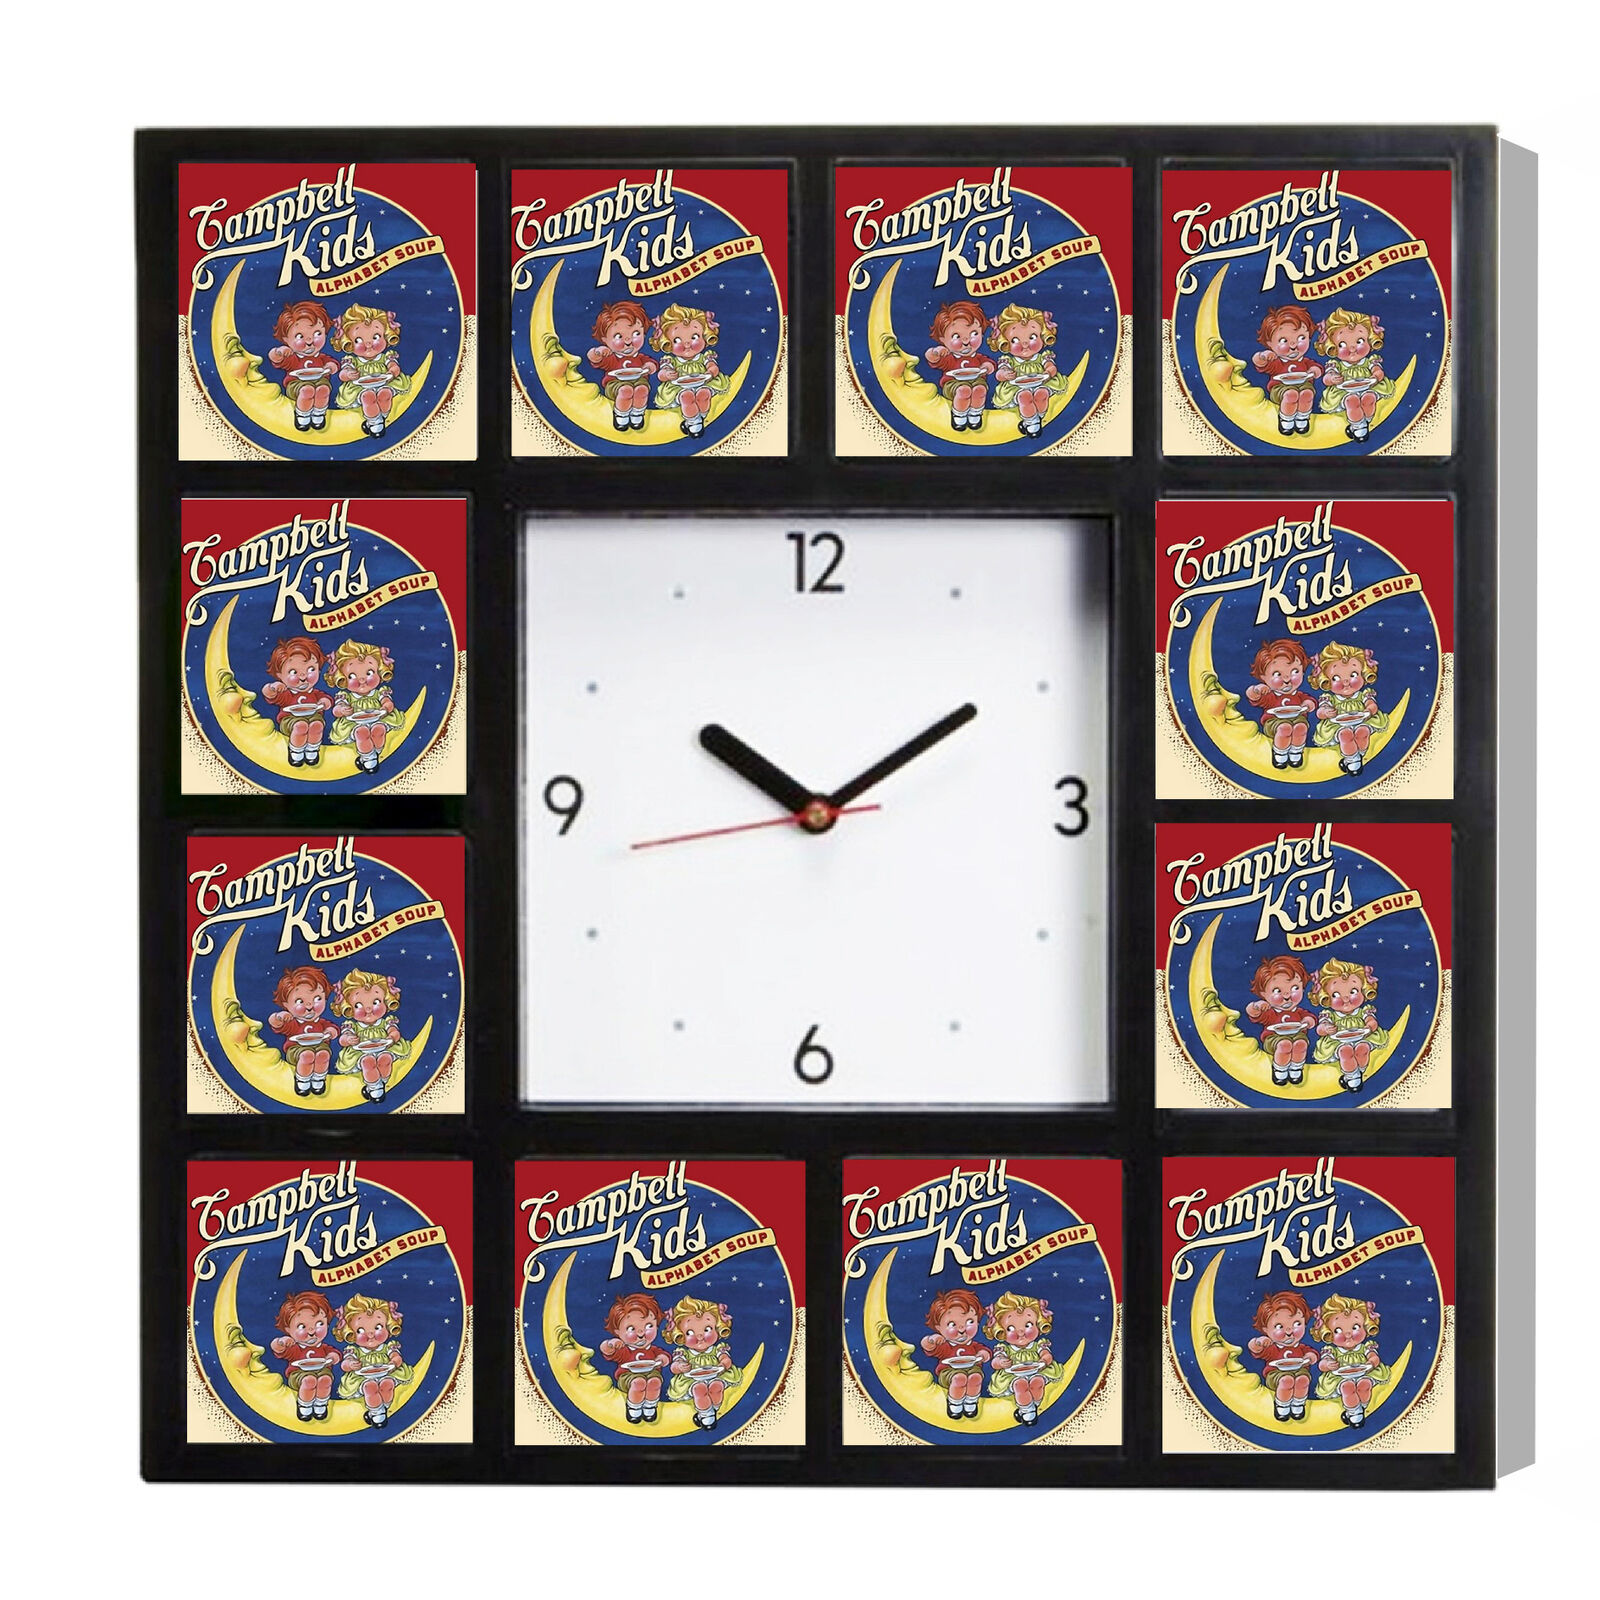 Advertising Campbell Kids Campbell's Soup Promo Diner Clock 10.5